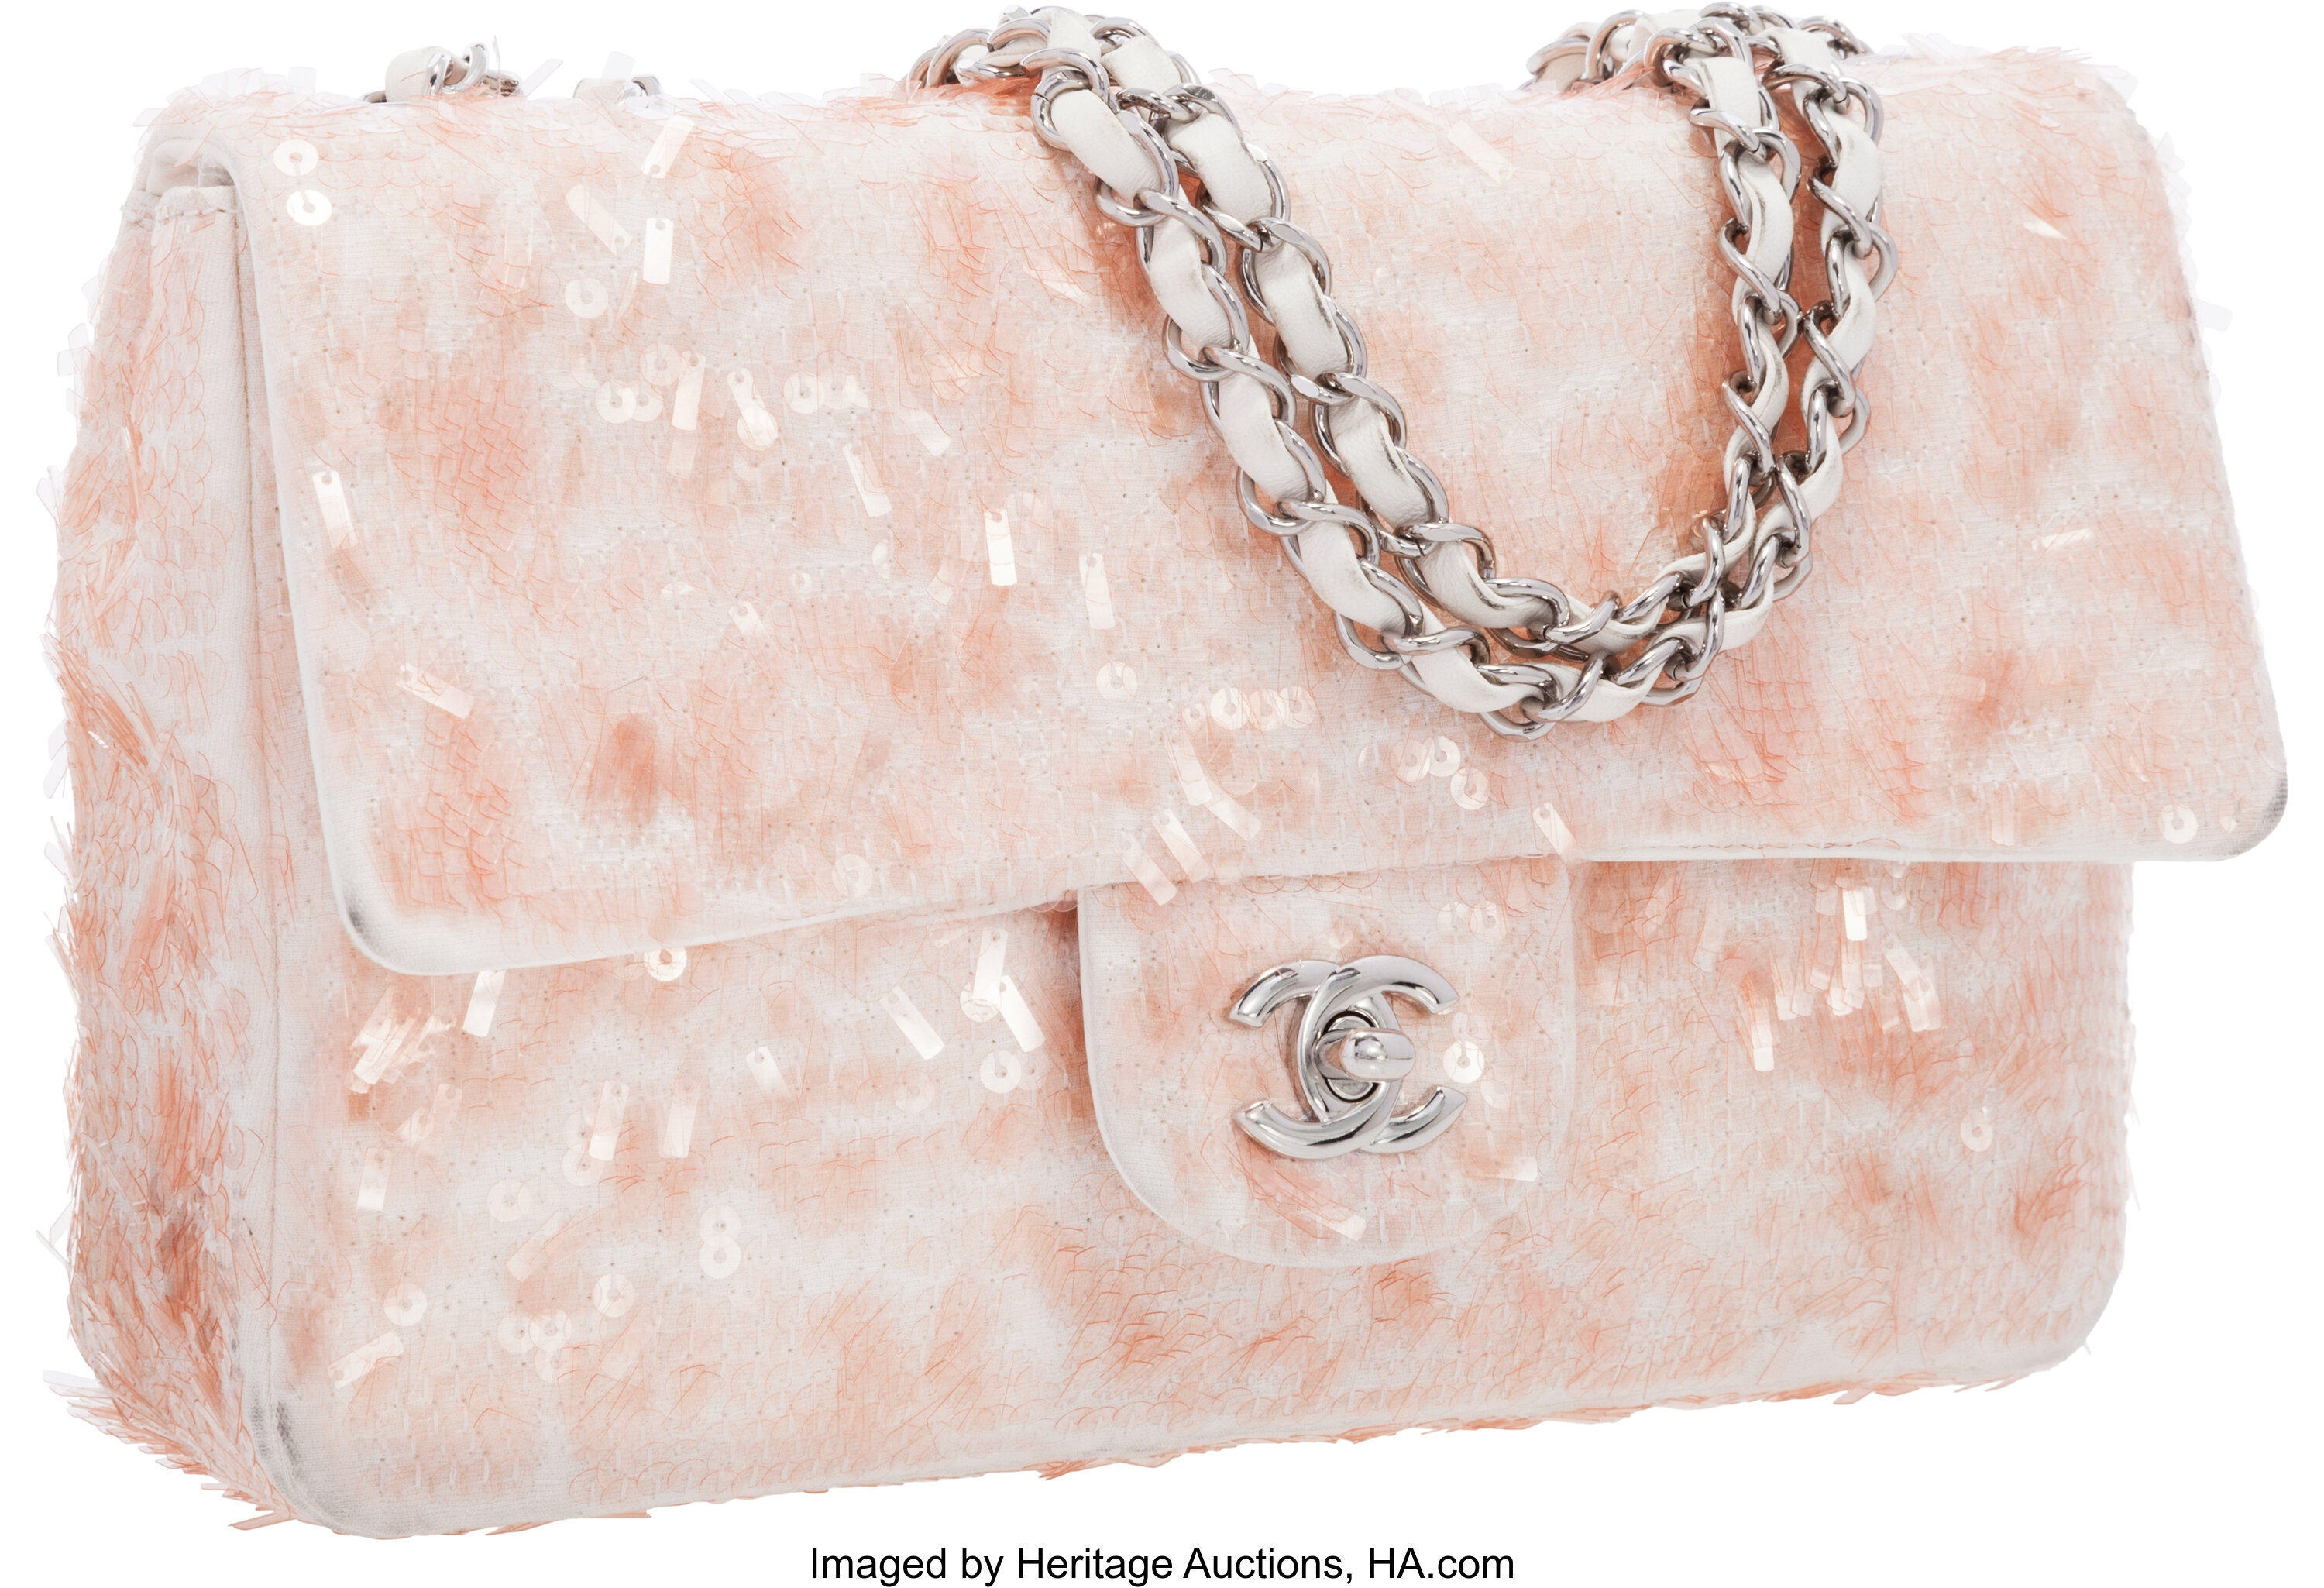 10 amazing handbags in Heritage's May Luxury Accessories Auction